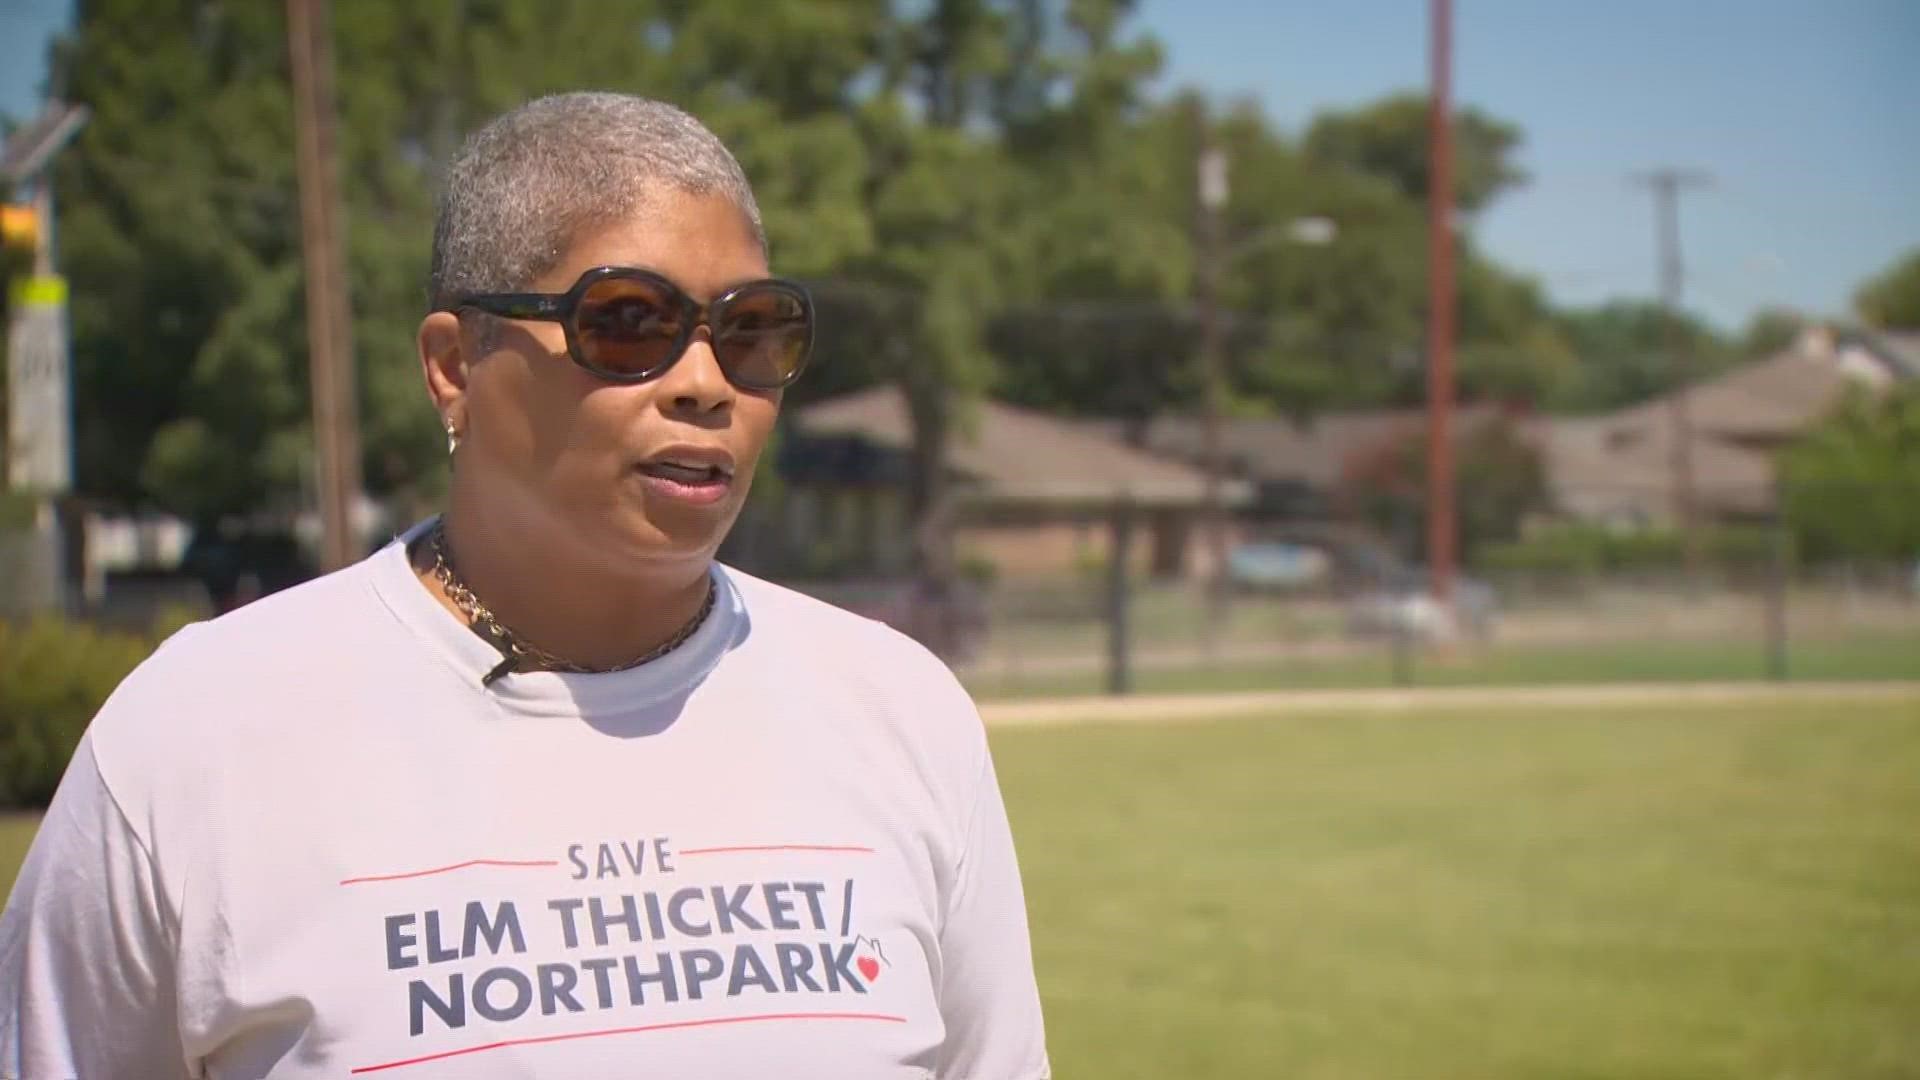 Some community members in the Elm Thicket-Northpark neighborhood in Dallas want to make sure they don't lose their historic community as the housing market booms.